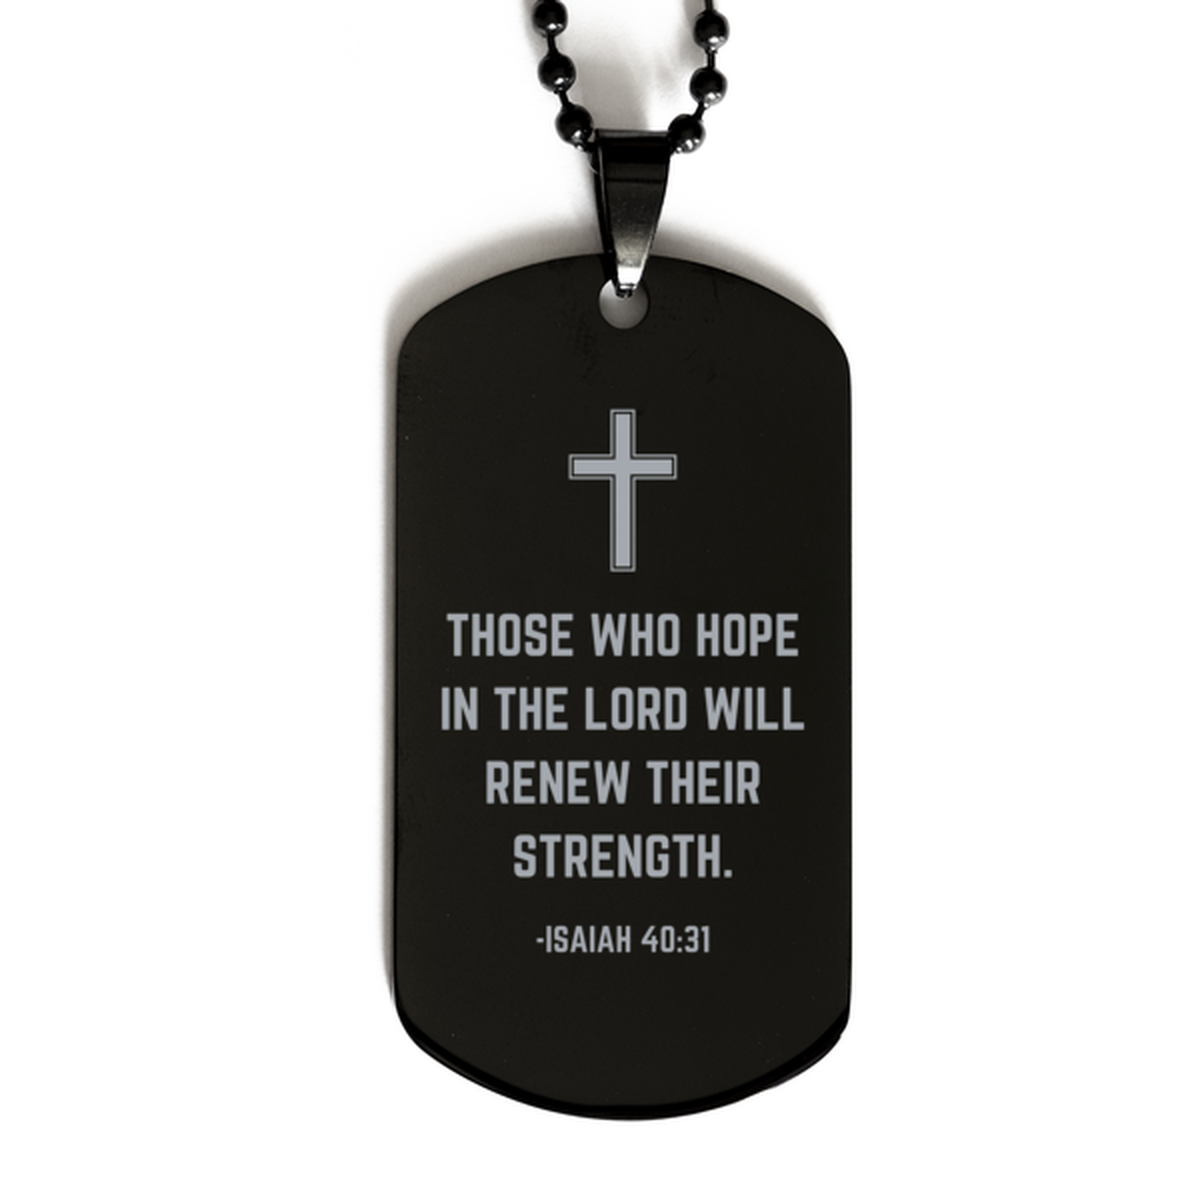 Baptism Gifts For Teenage Boys Girls, Christian Bible Verse Black Dog Tag, Those who hope in the Lord, Confirmation Gifts, Bible Verse Necklace for Son, Godson, Grandson, Nephew